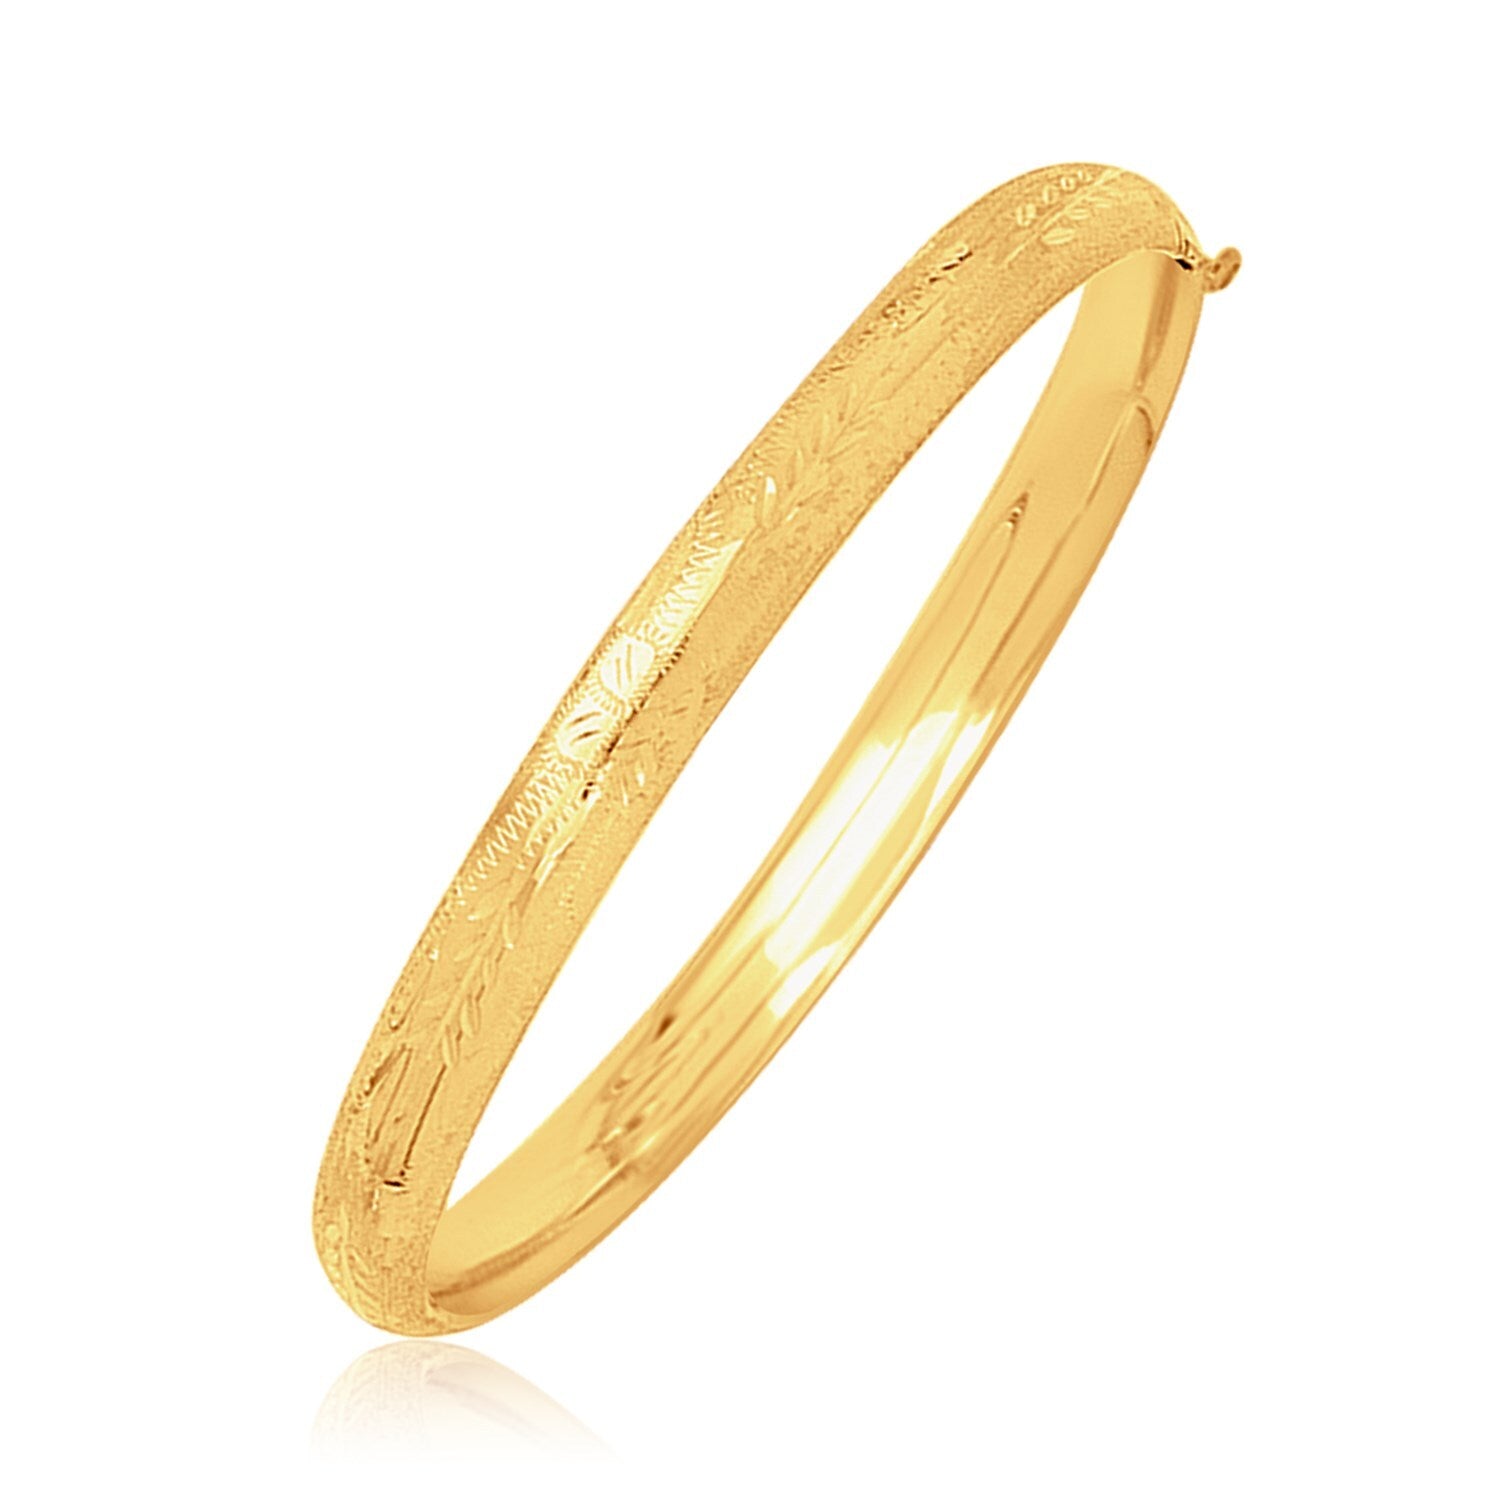 14k Yellow Gold Dome Motif Children's Bangle with Diamond Cuts, size 5.5''